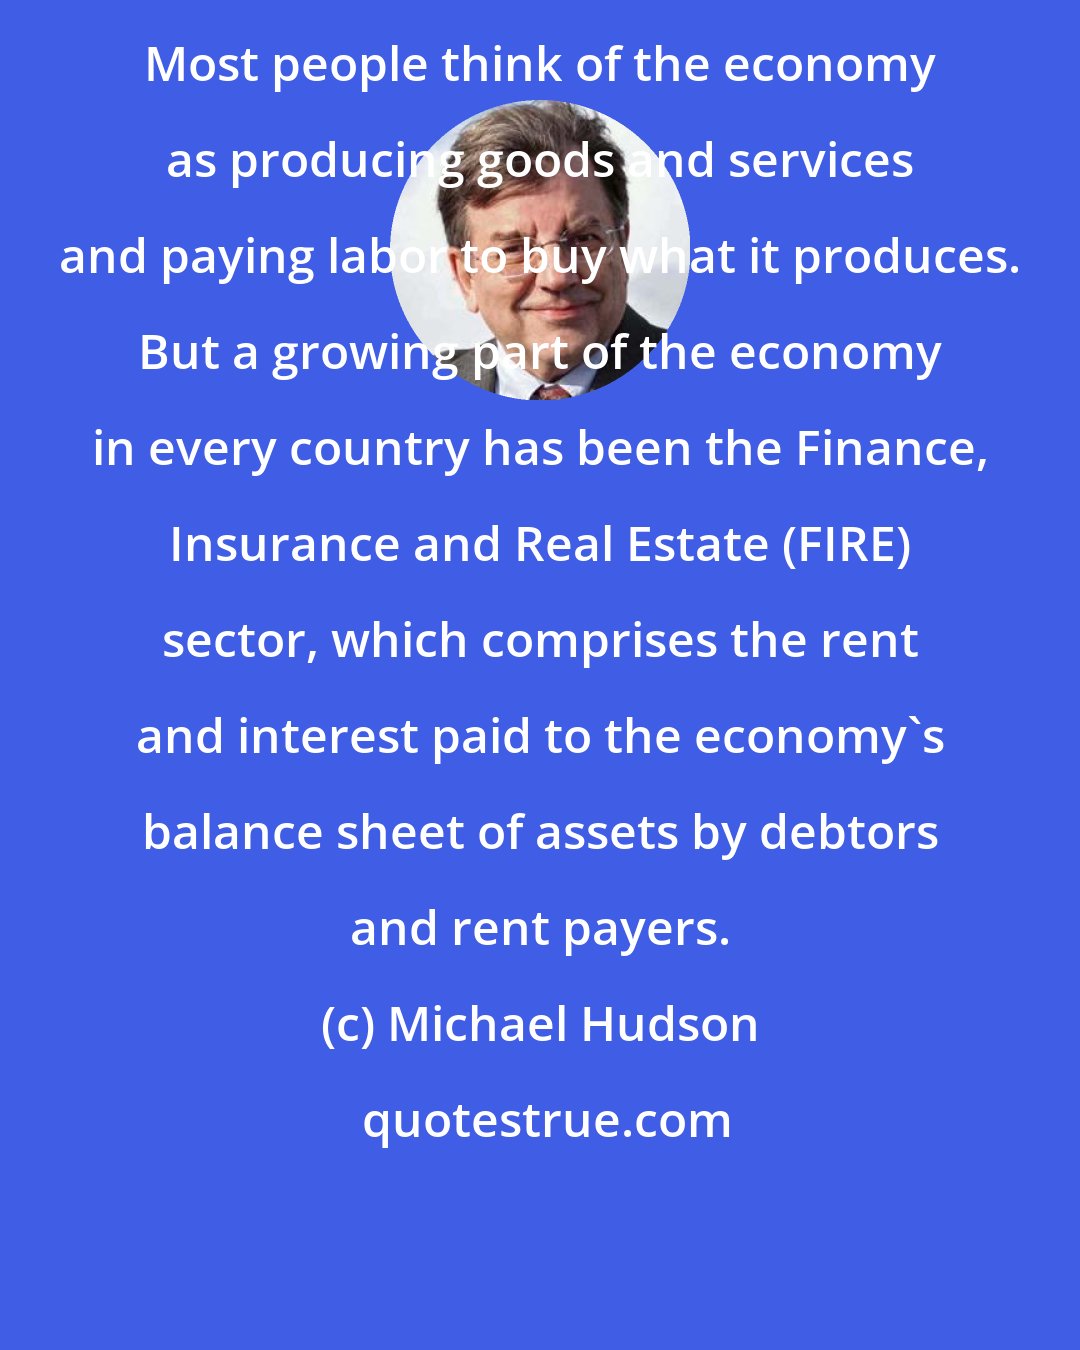 Michael Hudson: Most people think of the economy as producing goods and services and paying labor to buy what it produces. But a growing part of the economy in every country has been the Finance, Insurance and Real Estate (FIRE) sector, which comprises the rent and interest paid to the economy's balance sheet of assets by debtors and rent payers.